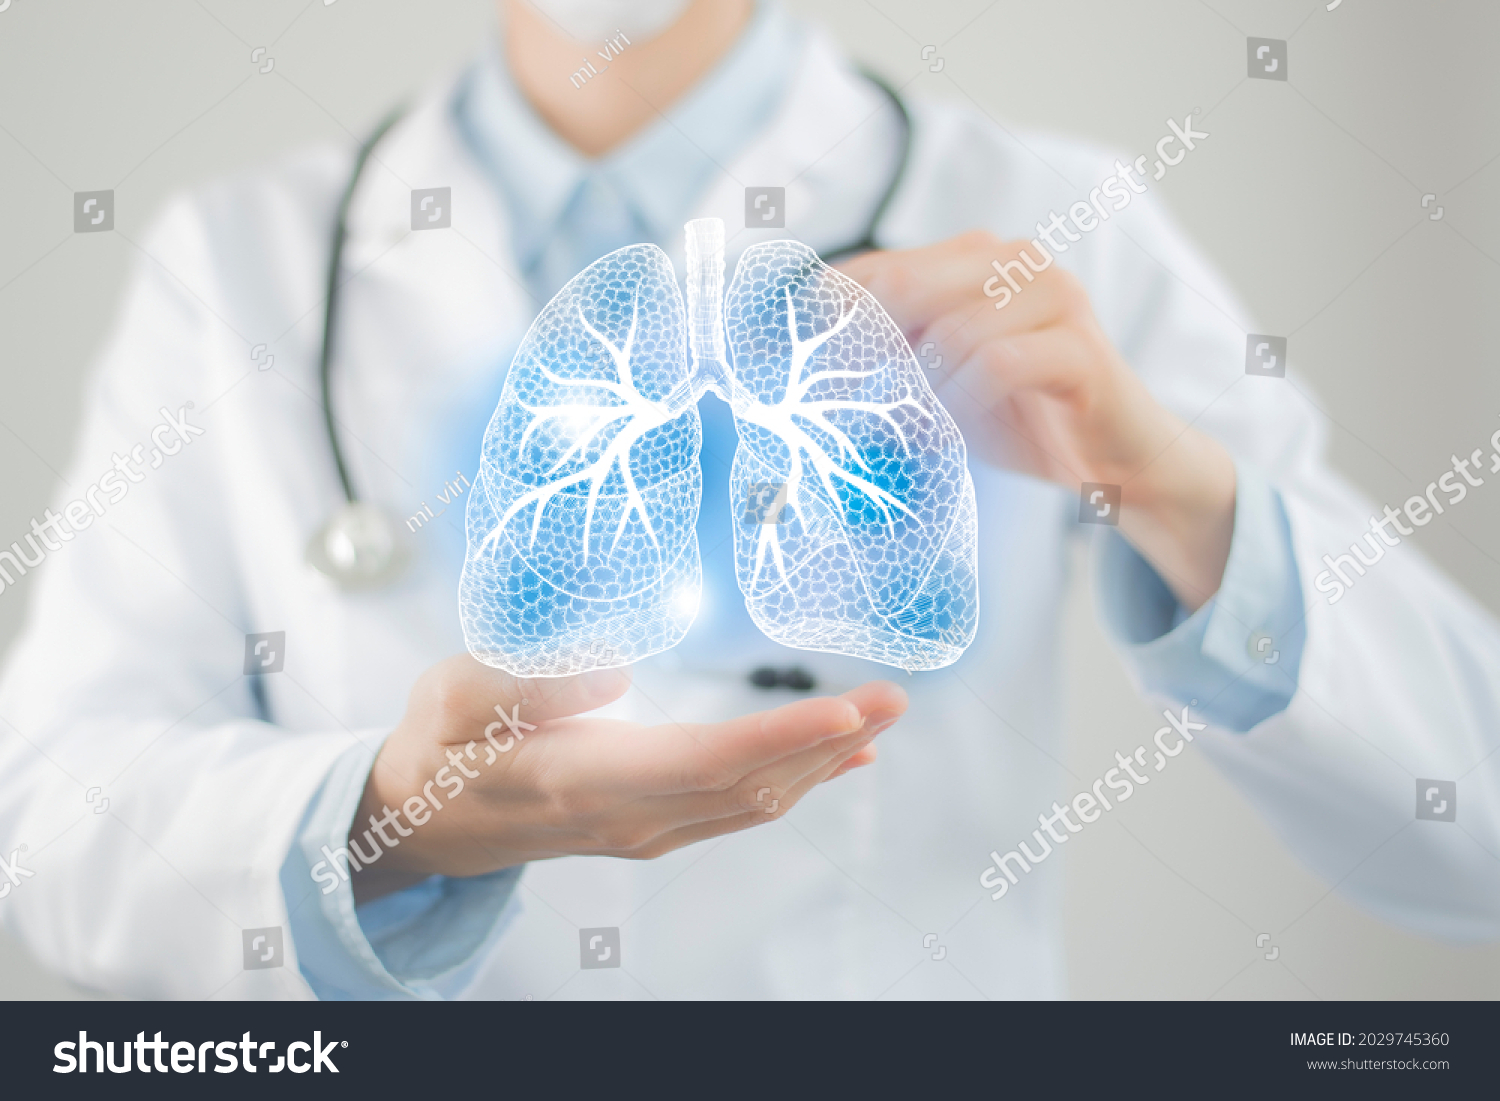 Female doctor holding virtual Lungs in hand. Handrawn human organ, copy space on right side, raw photo colors. Healthcare hospital service concept stock photo #2029745360